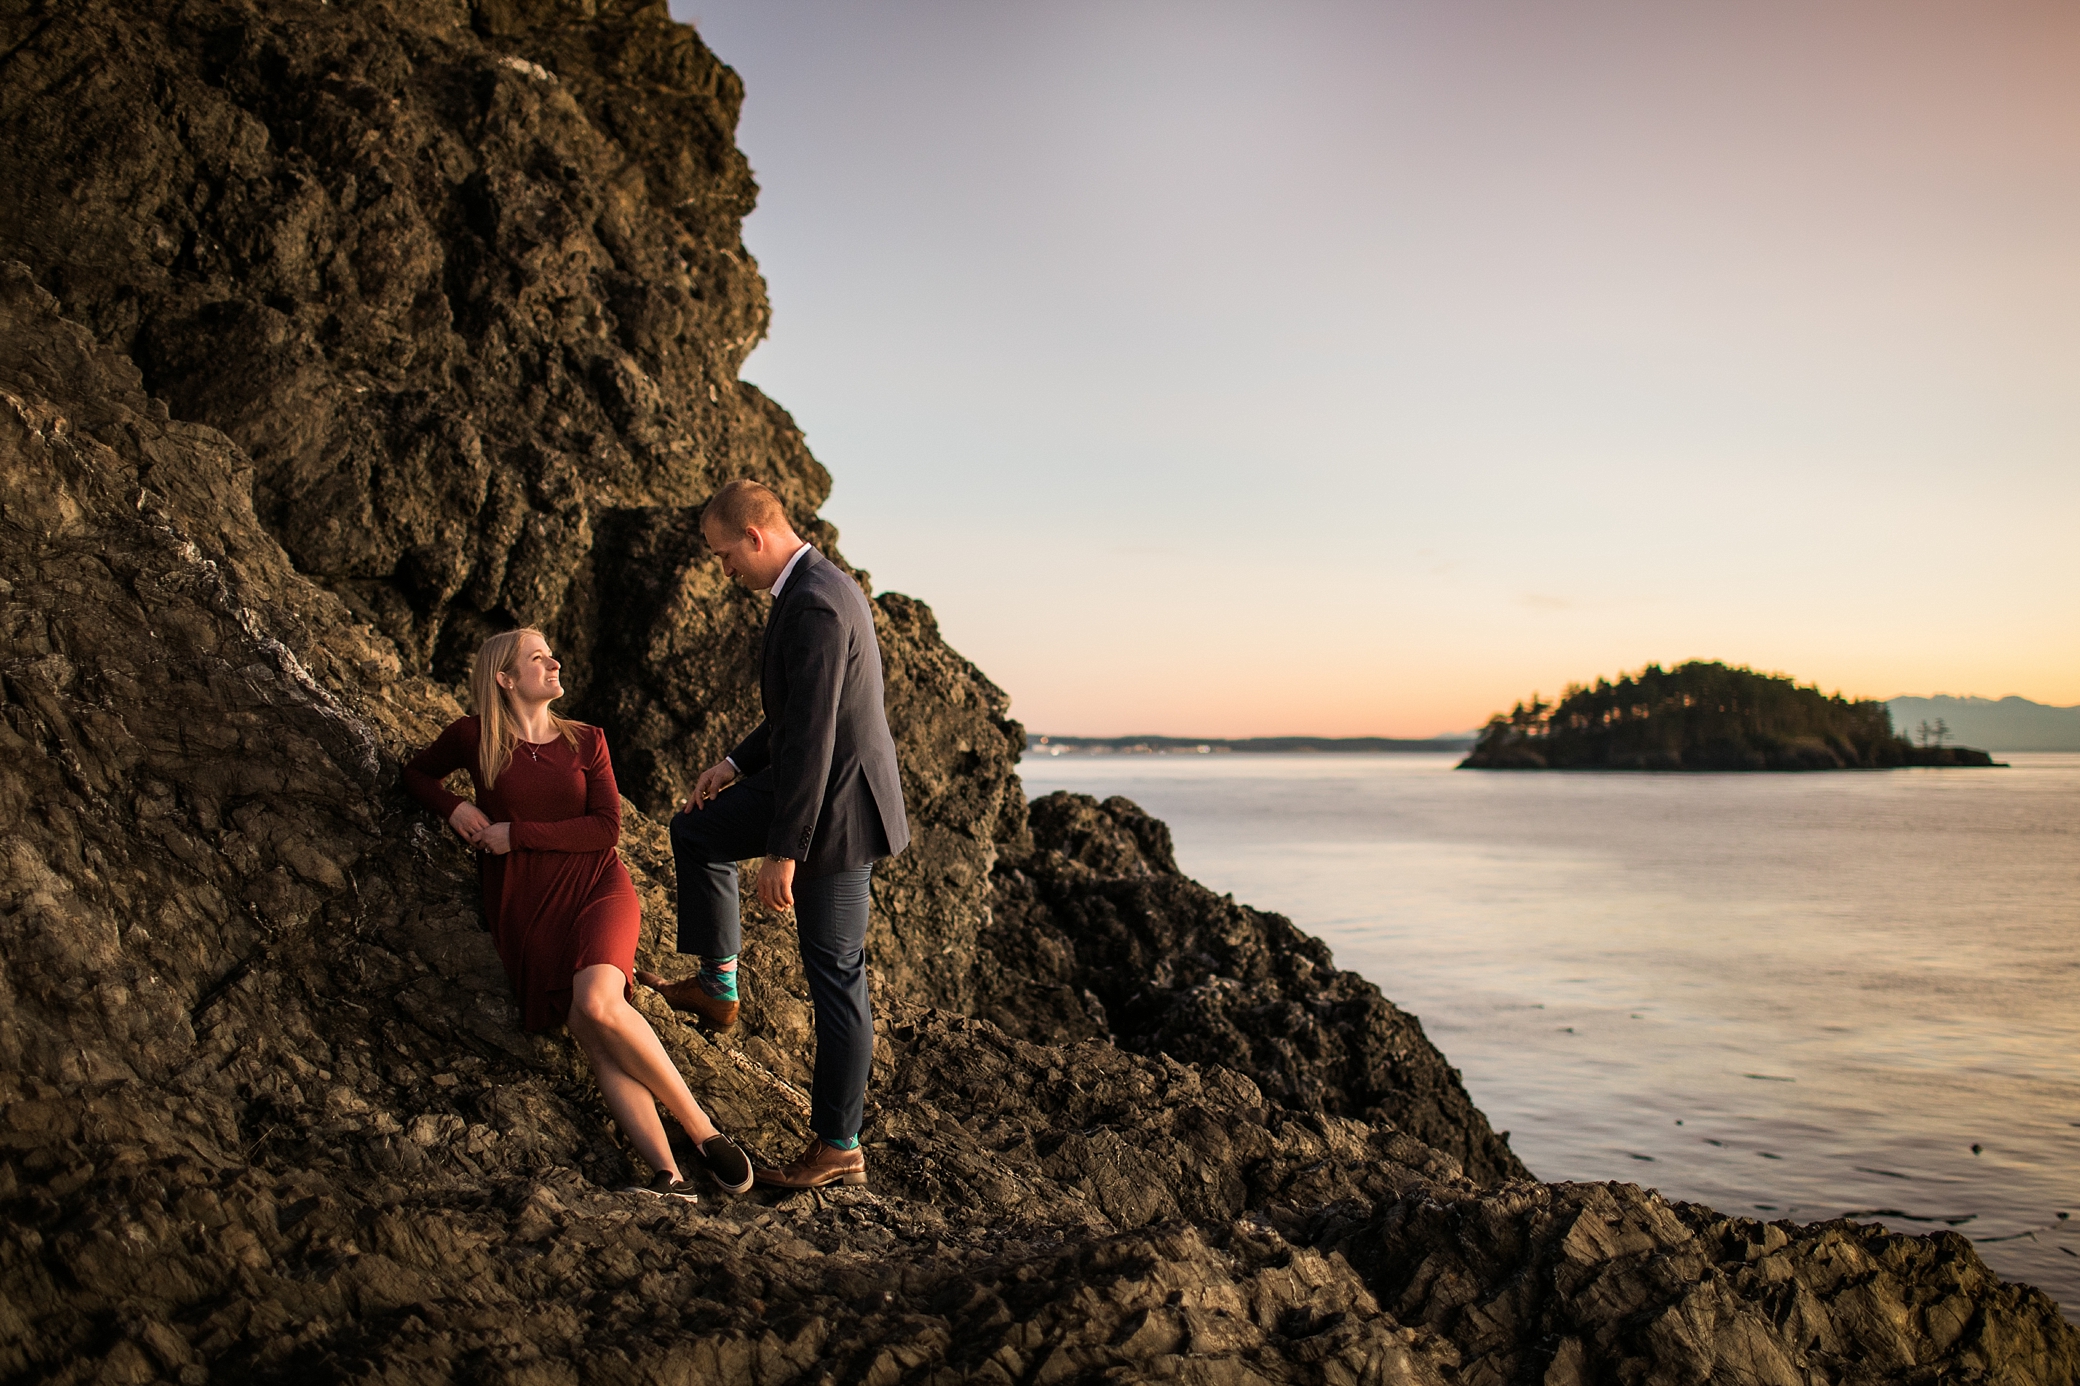 Sunset at Rosario Beach during engagement session | Megan Montalvo Photography